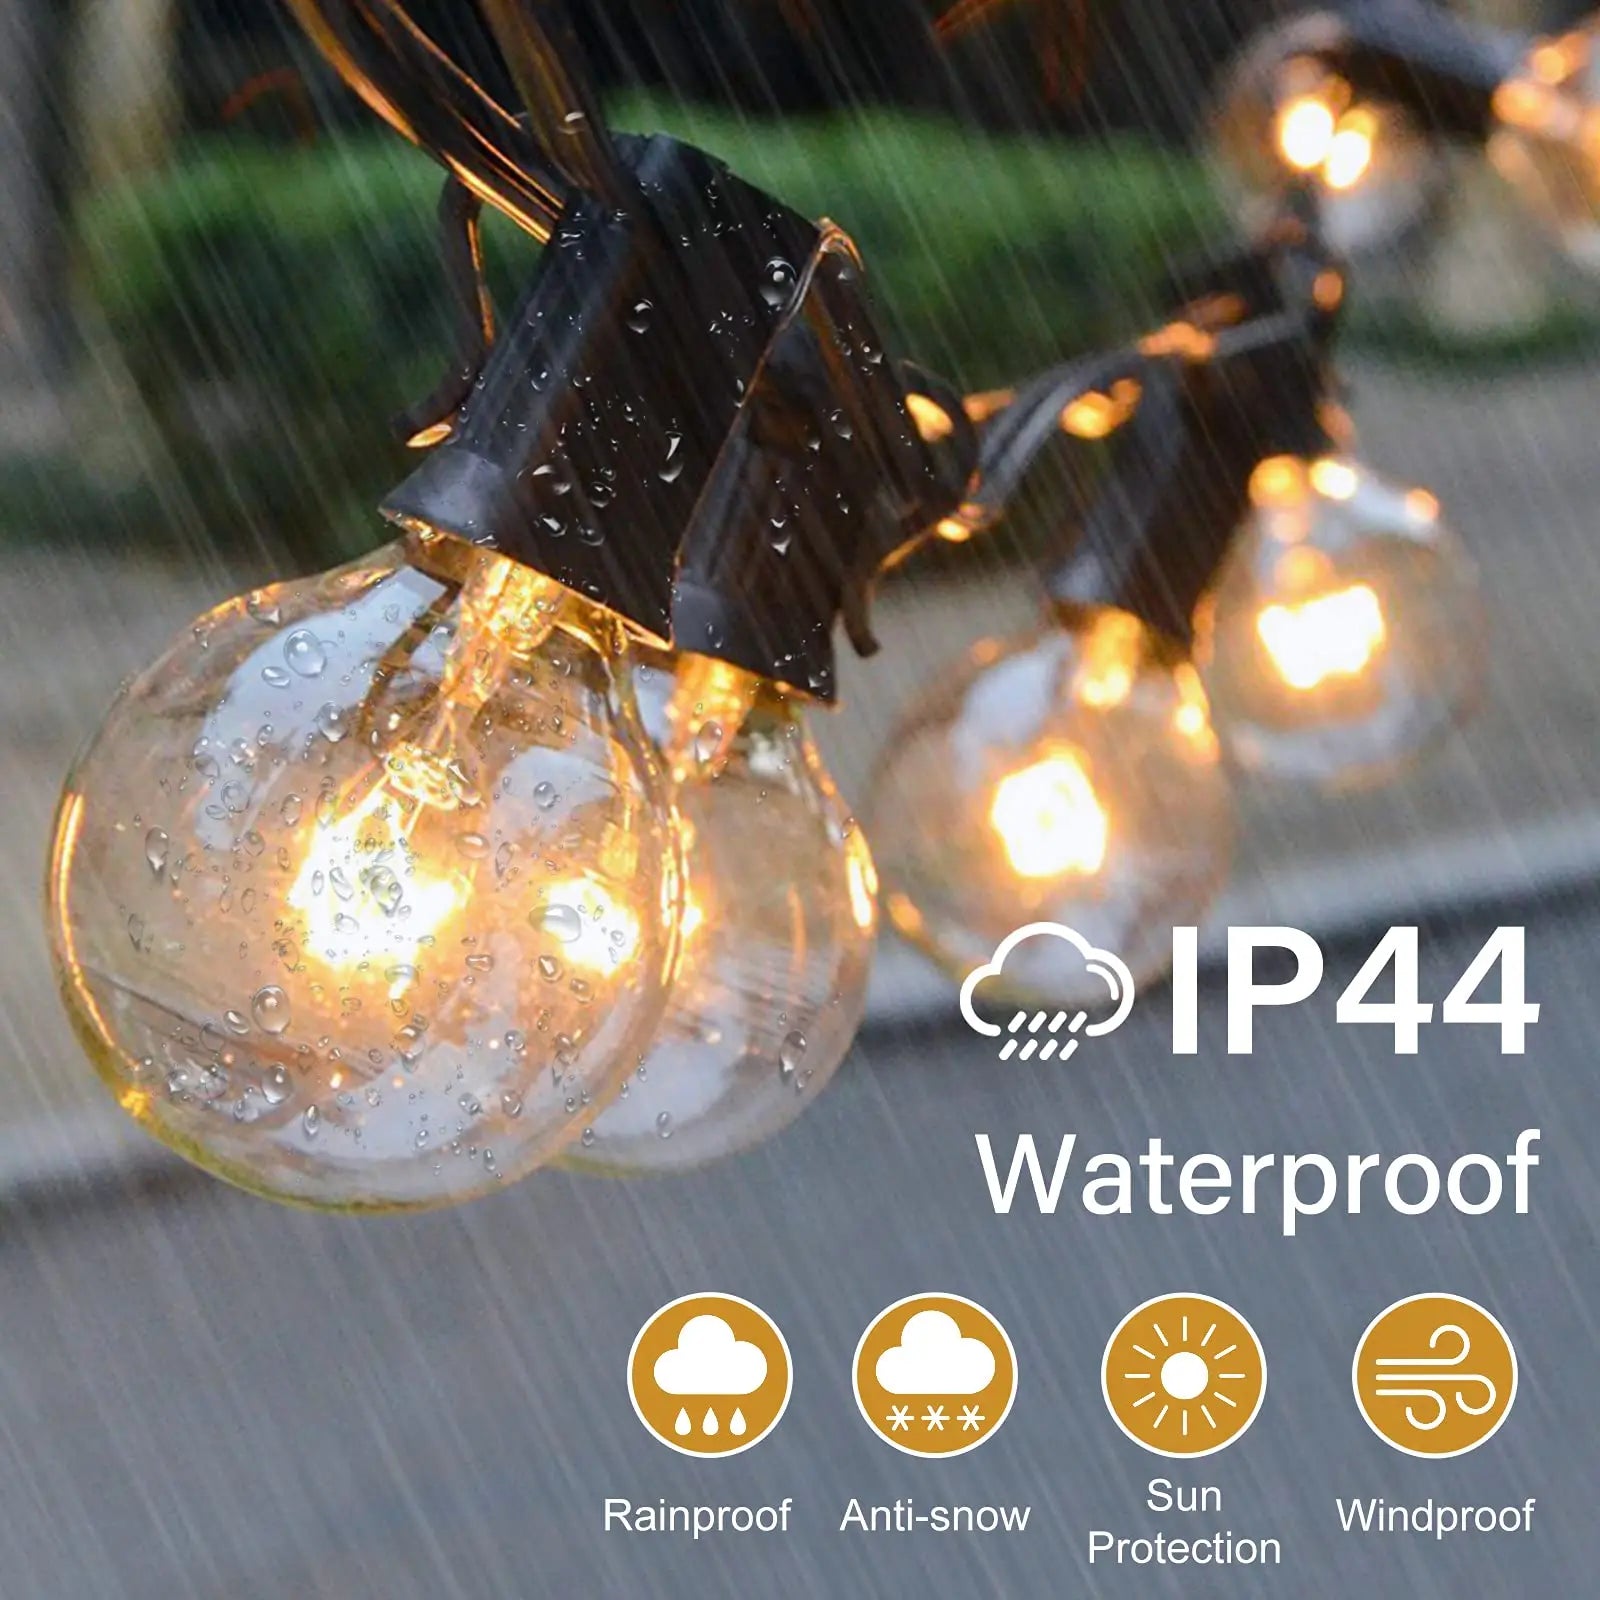 25FT Fairy String Light, Water-resistant design ensures durability in rainy, snowy, sunny, and windy conditions.